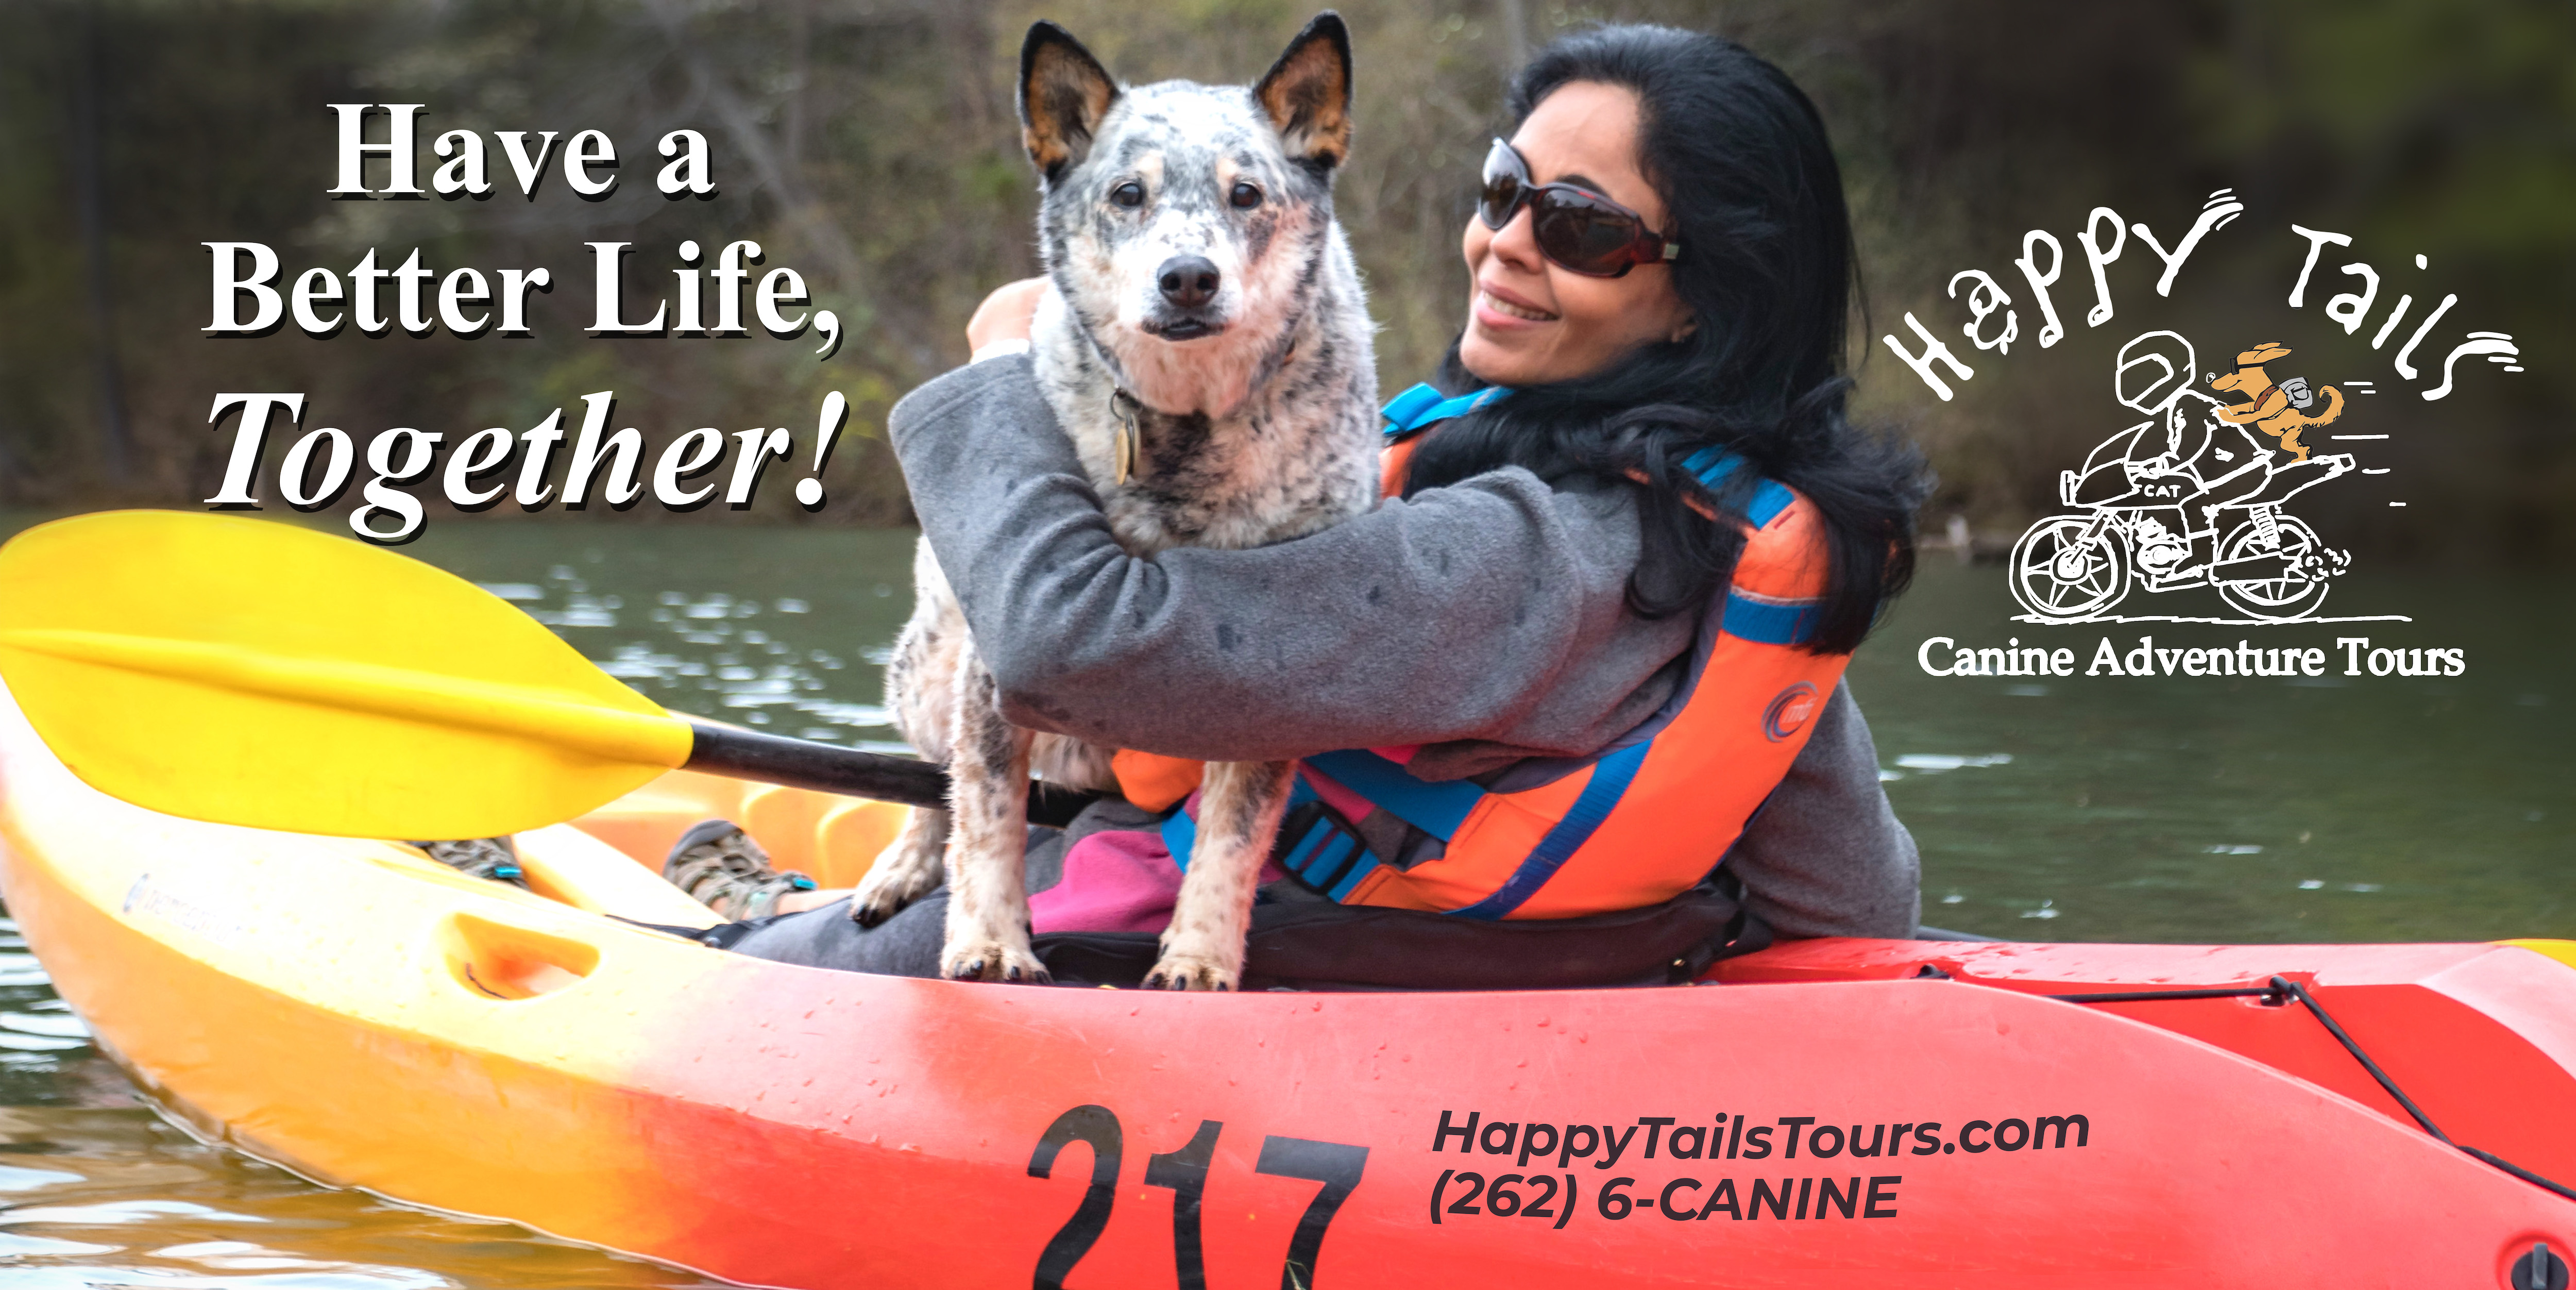 Happy Tails Tours - Have a Better Life Together